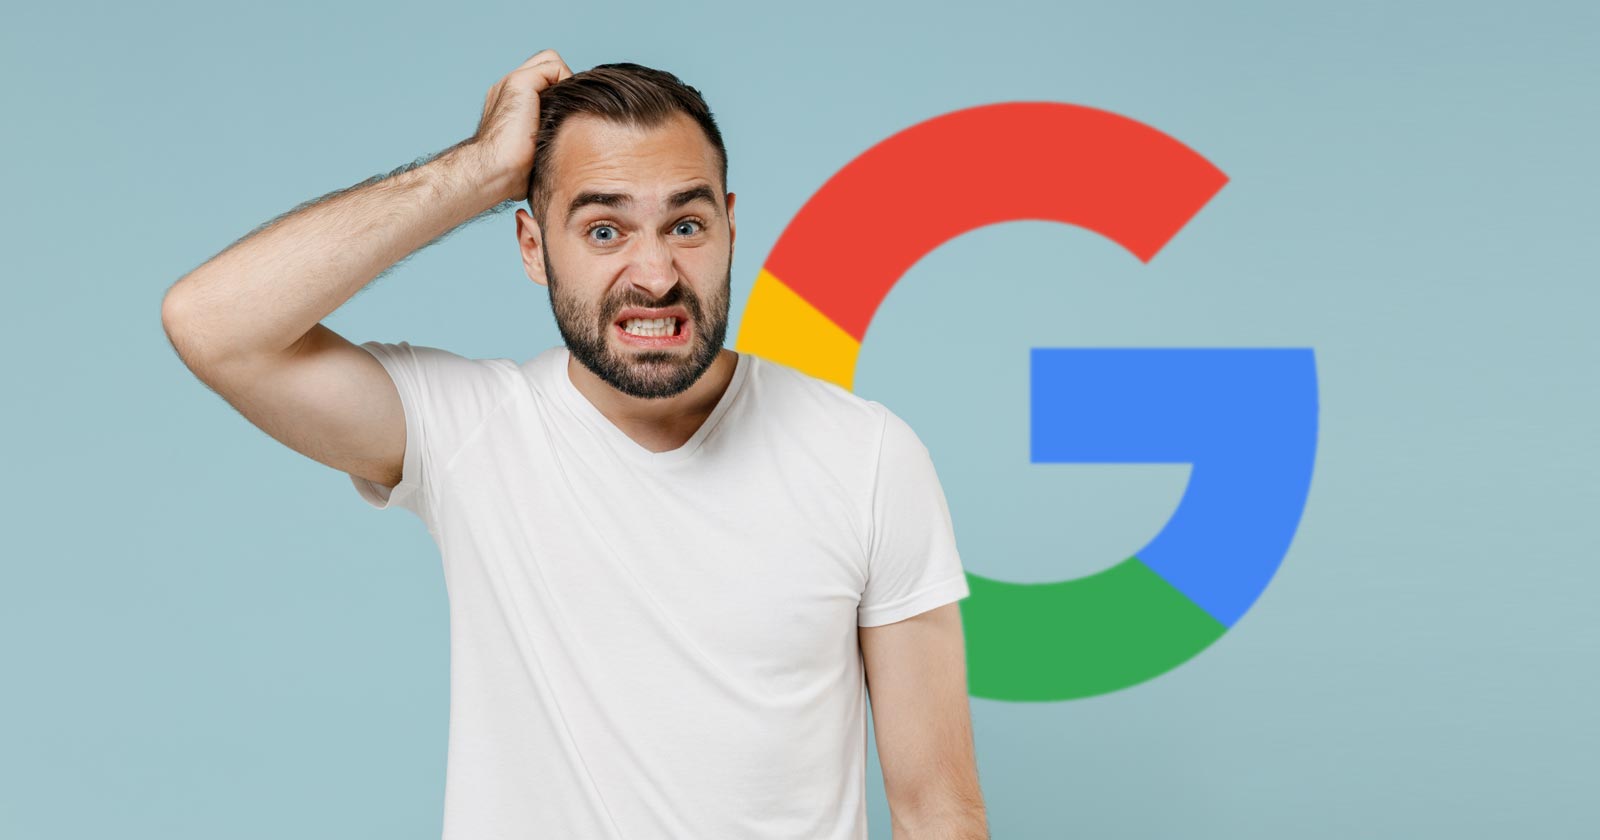 Answering the question of whether Google is broken